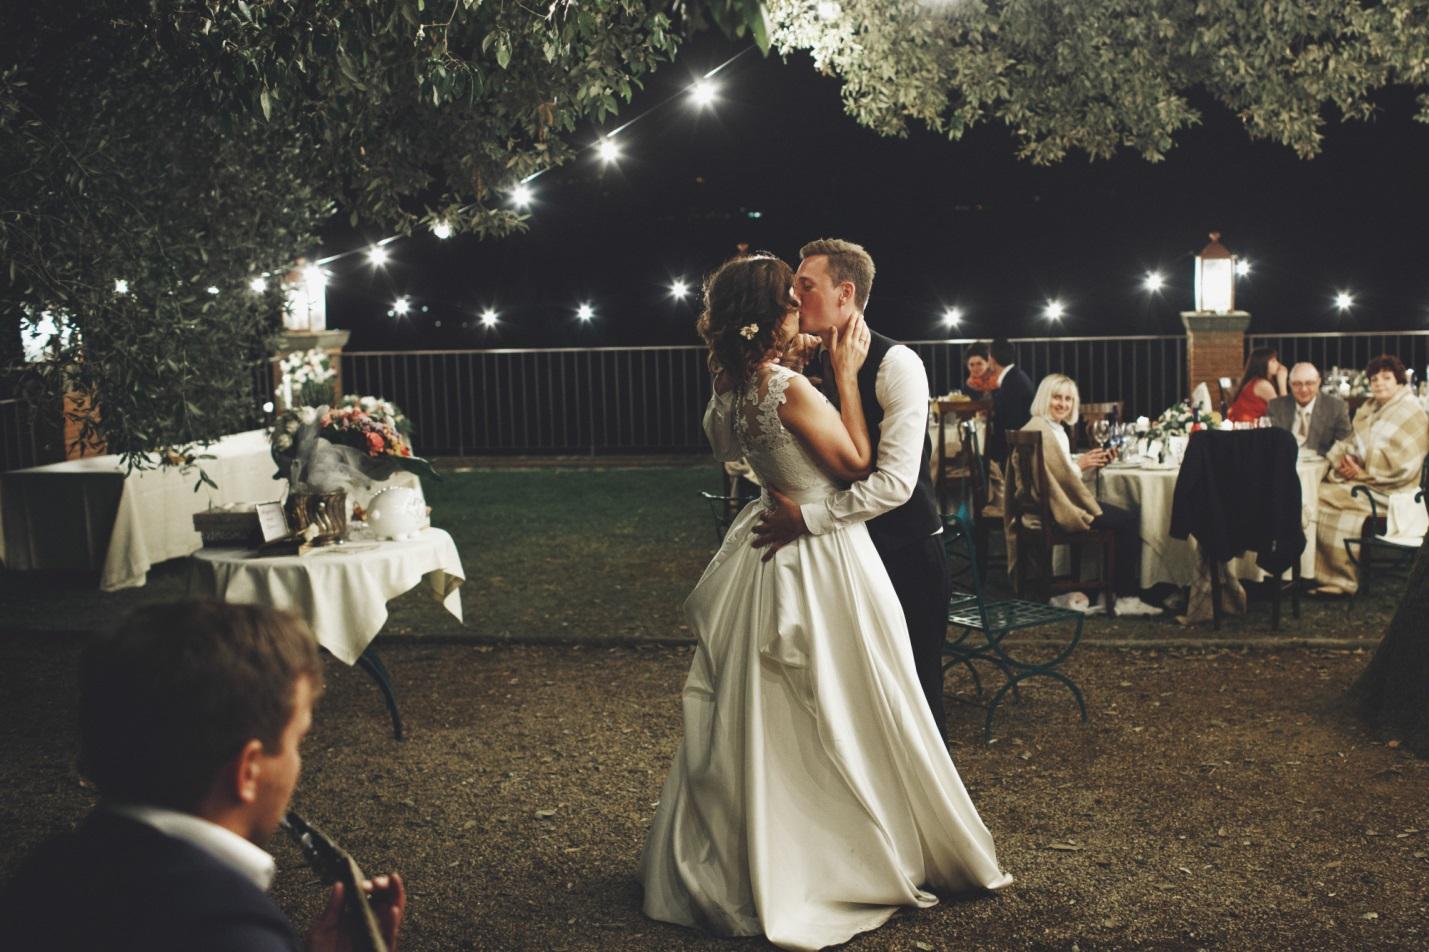 A bride and groom sharing their first dance in a backyard garden at night.